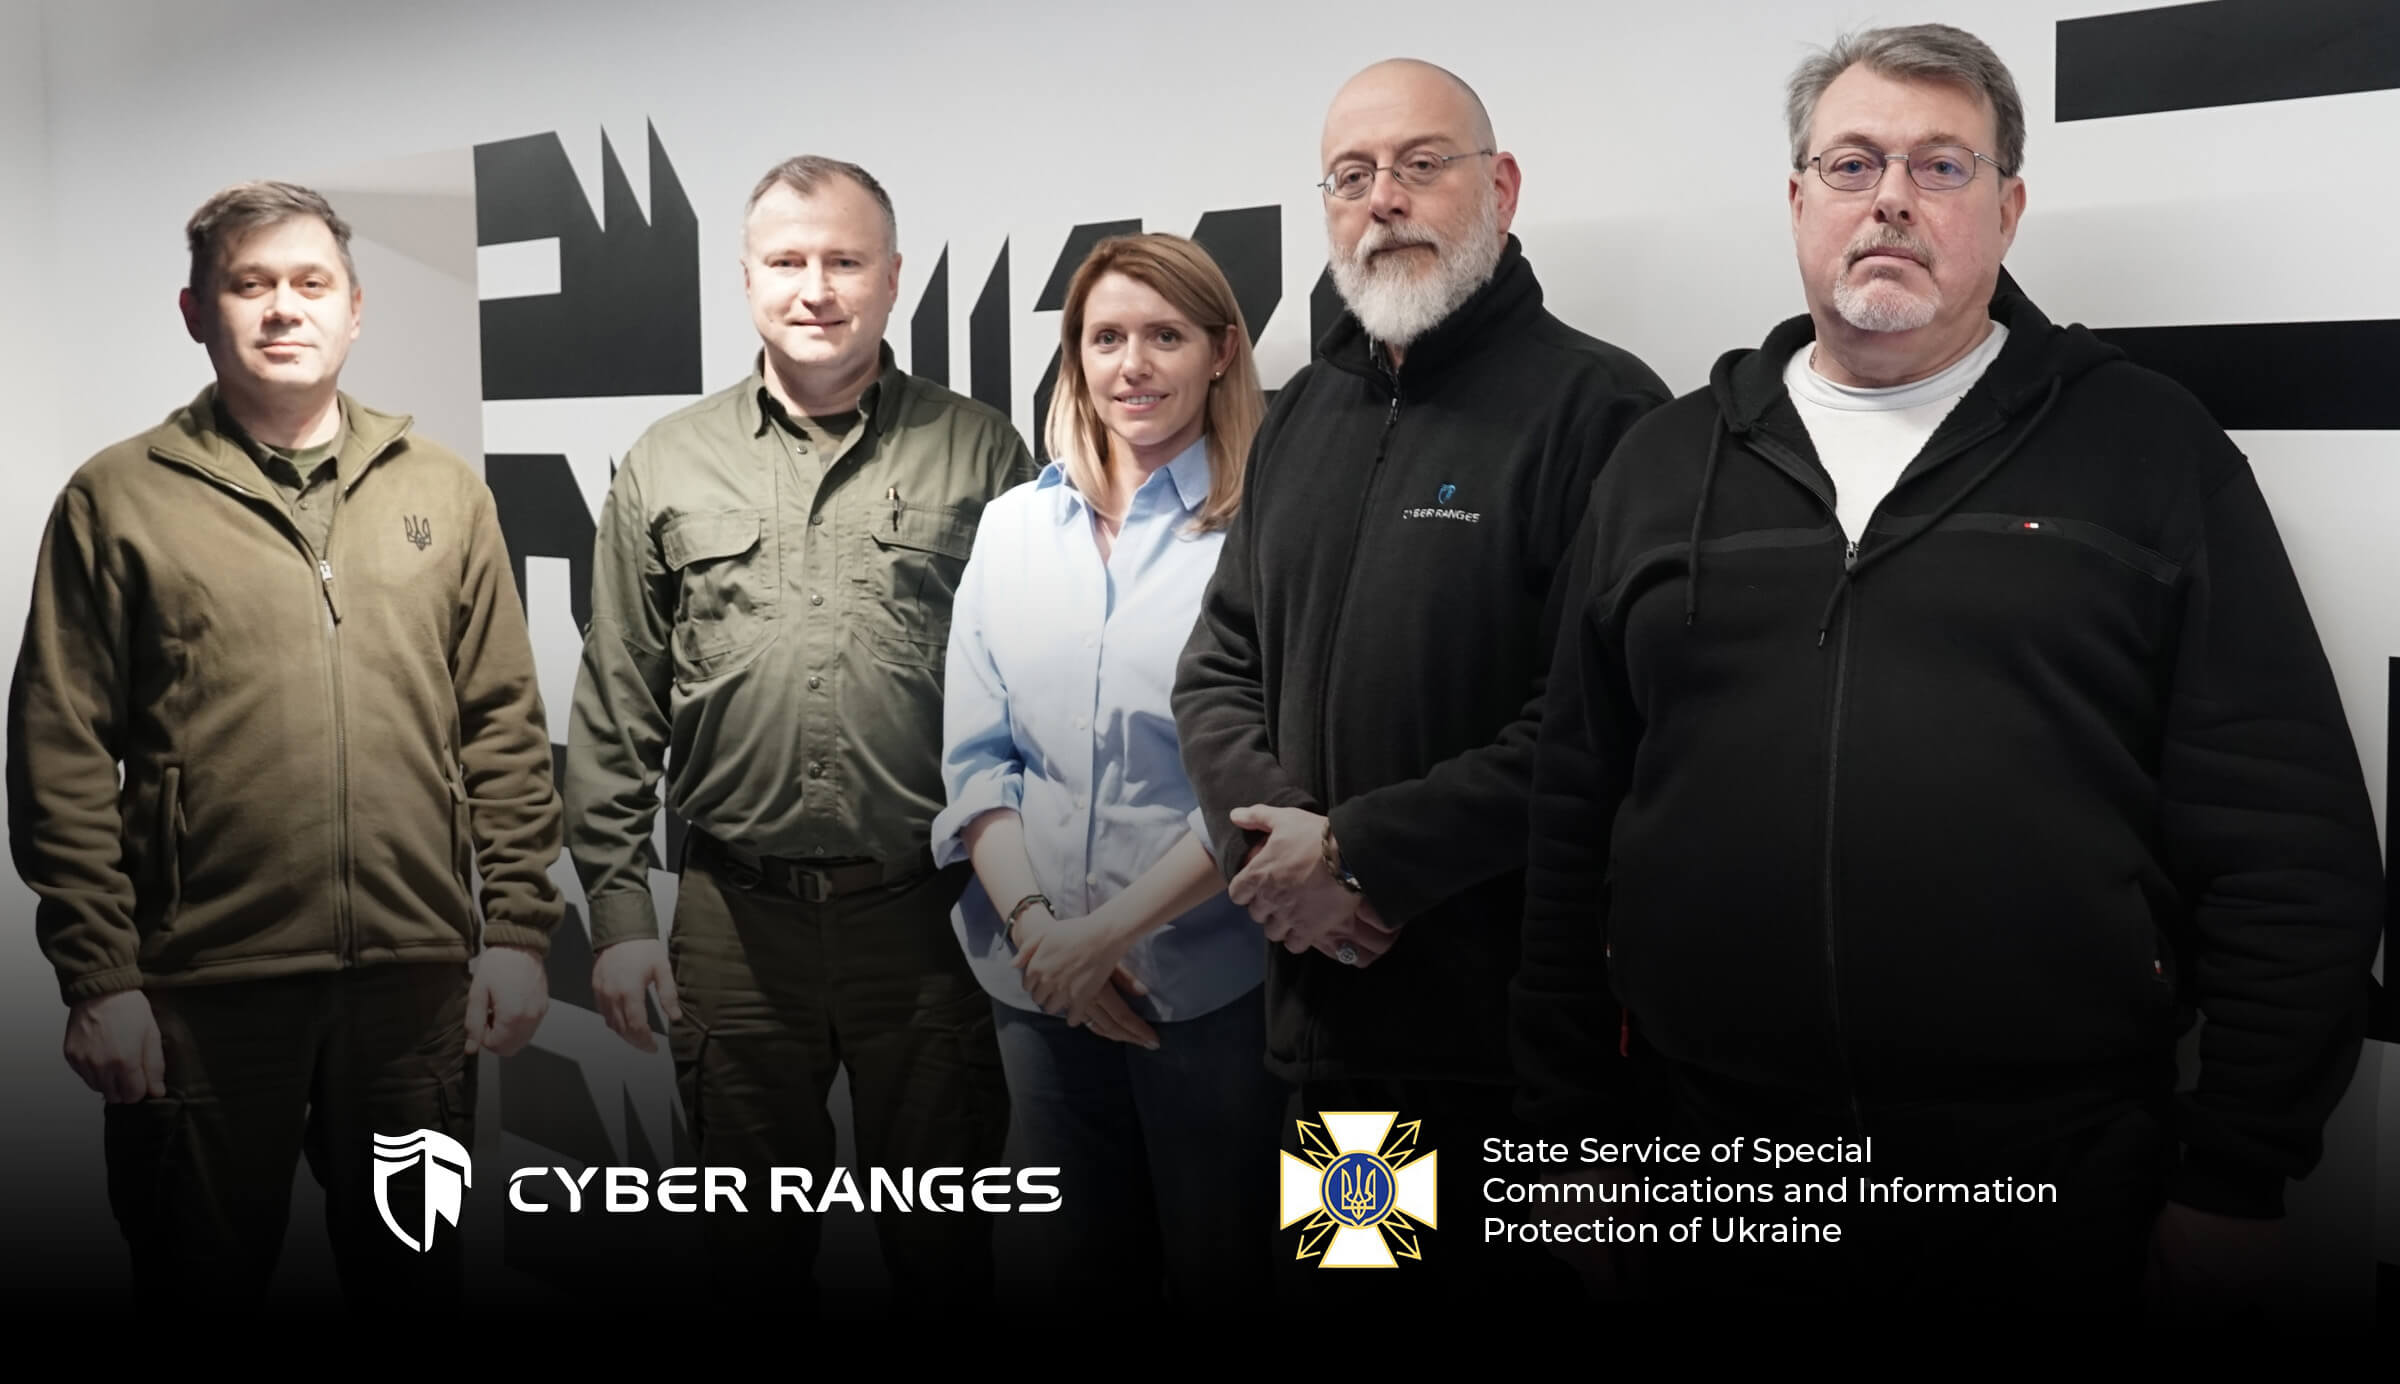 SSSCIP Hosted CYBER RANGES Corp